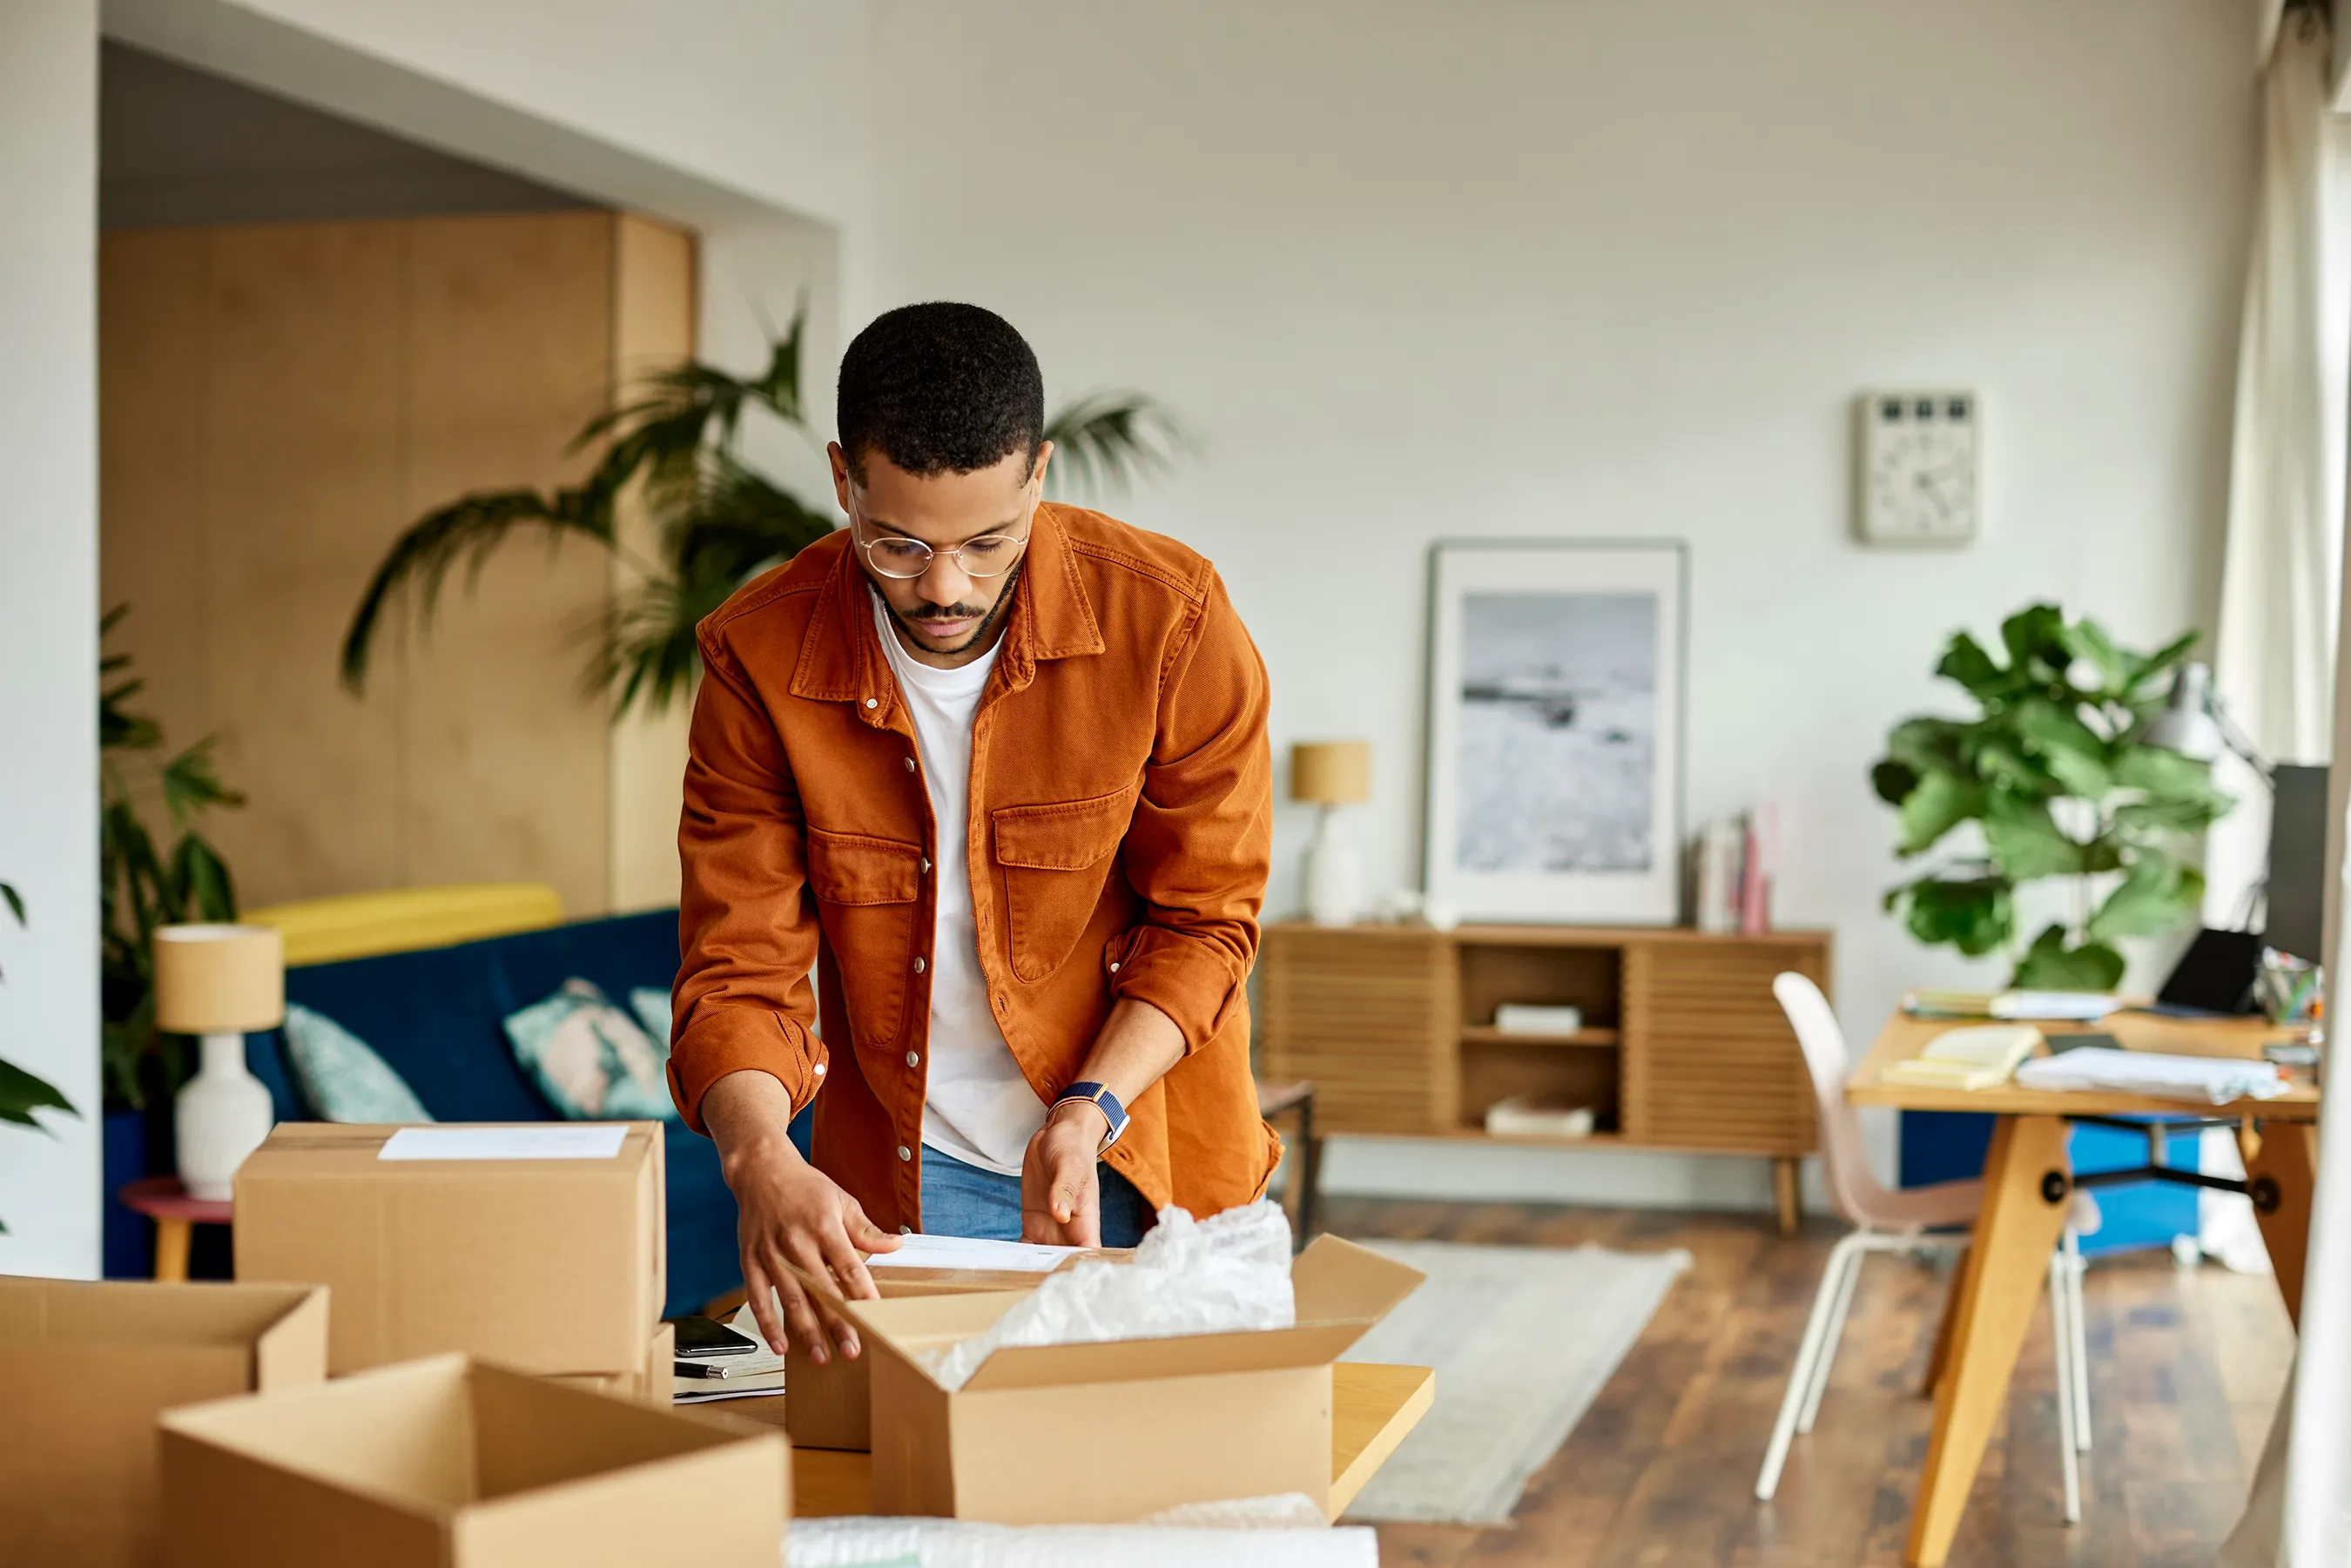 10 Easy Places You Can Get (Free!) Cardboard Boxes for Moving